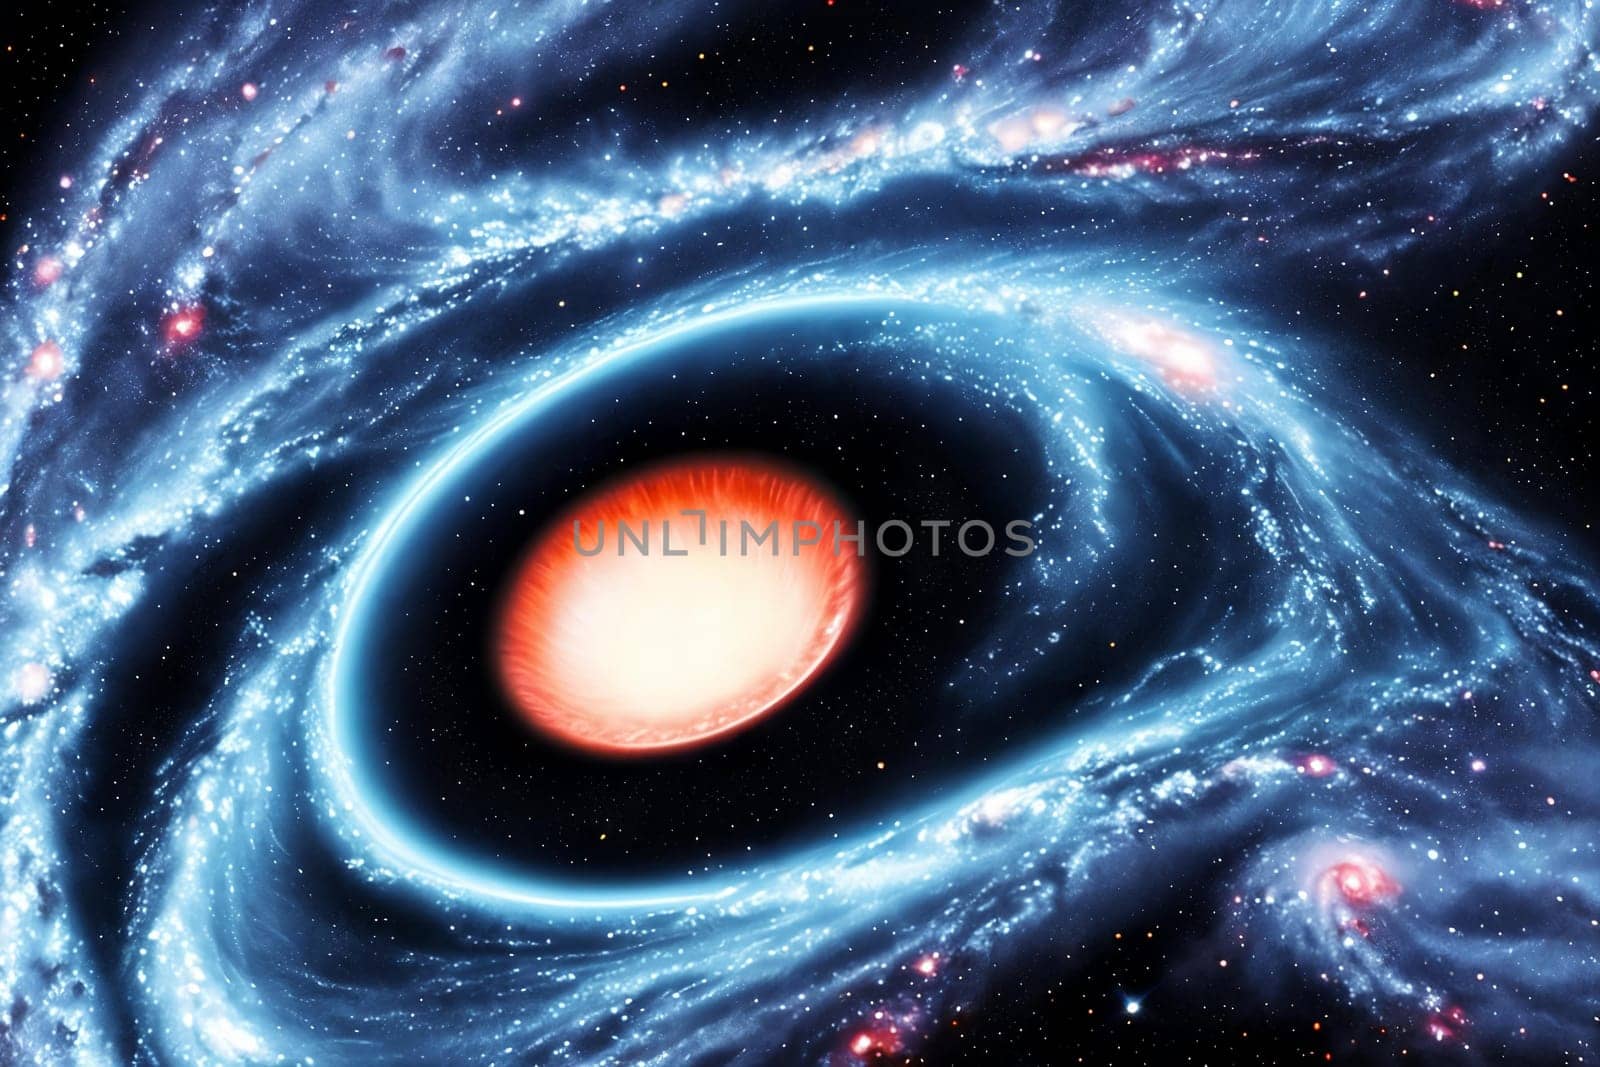 A mesmerizing illustration of a black hole in space by GoodOlga